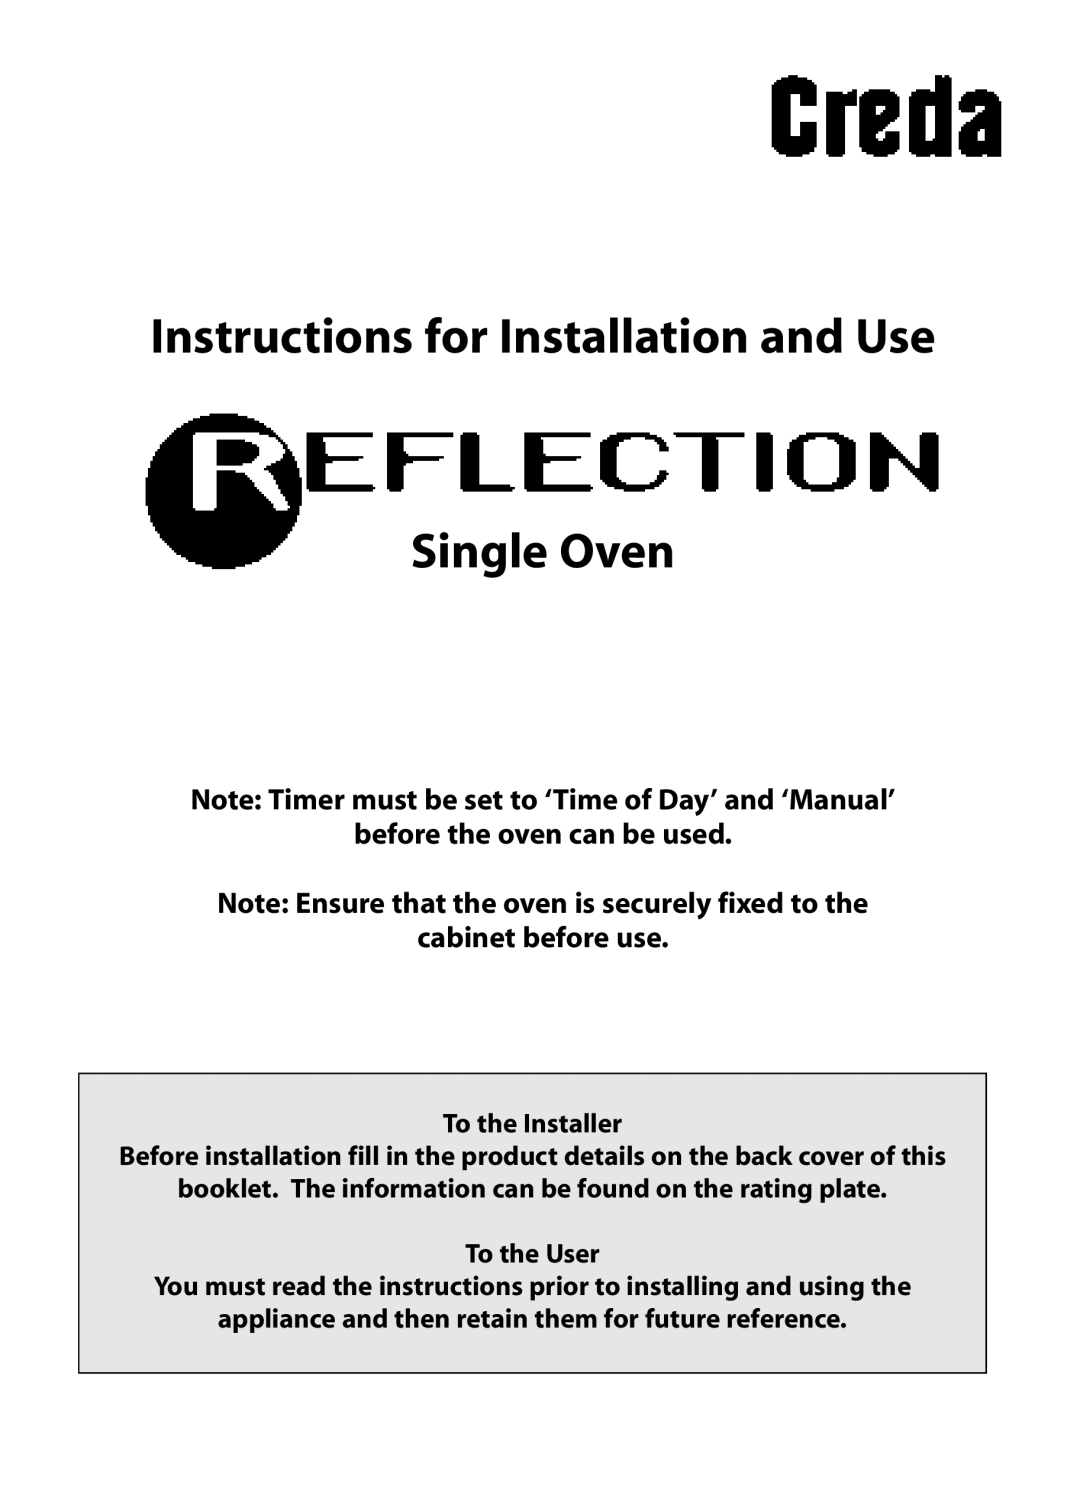 Creda REFLECTION manual Instructions for Installation and Use Single Oven, before the oven can be used, cabinet before use 